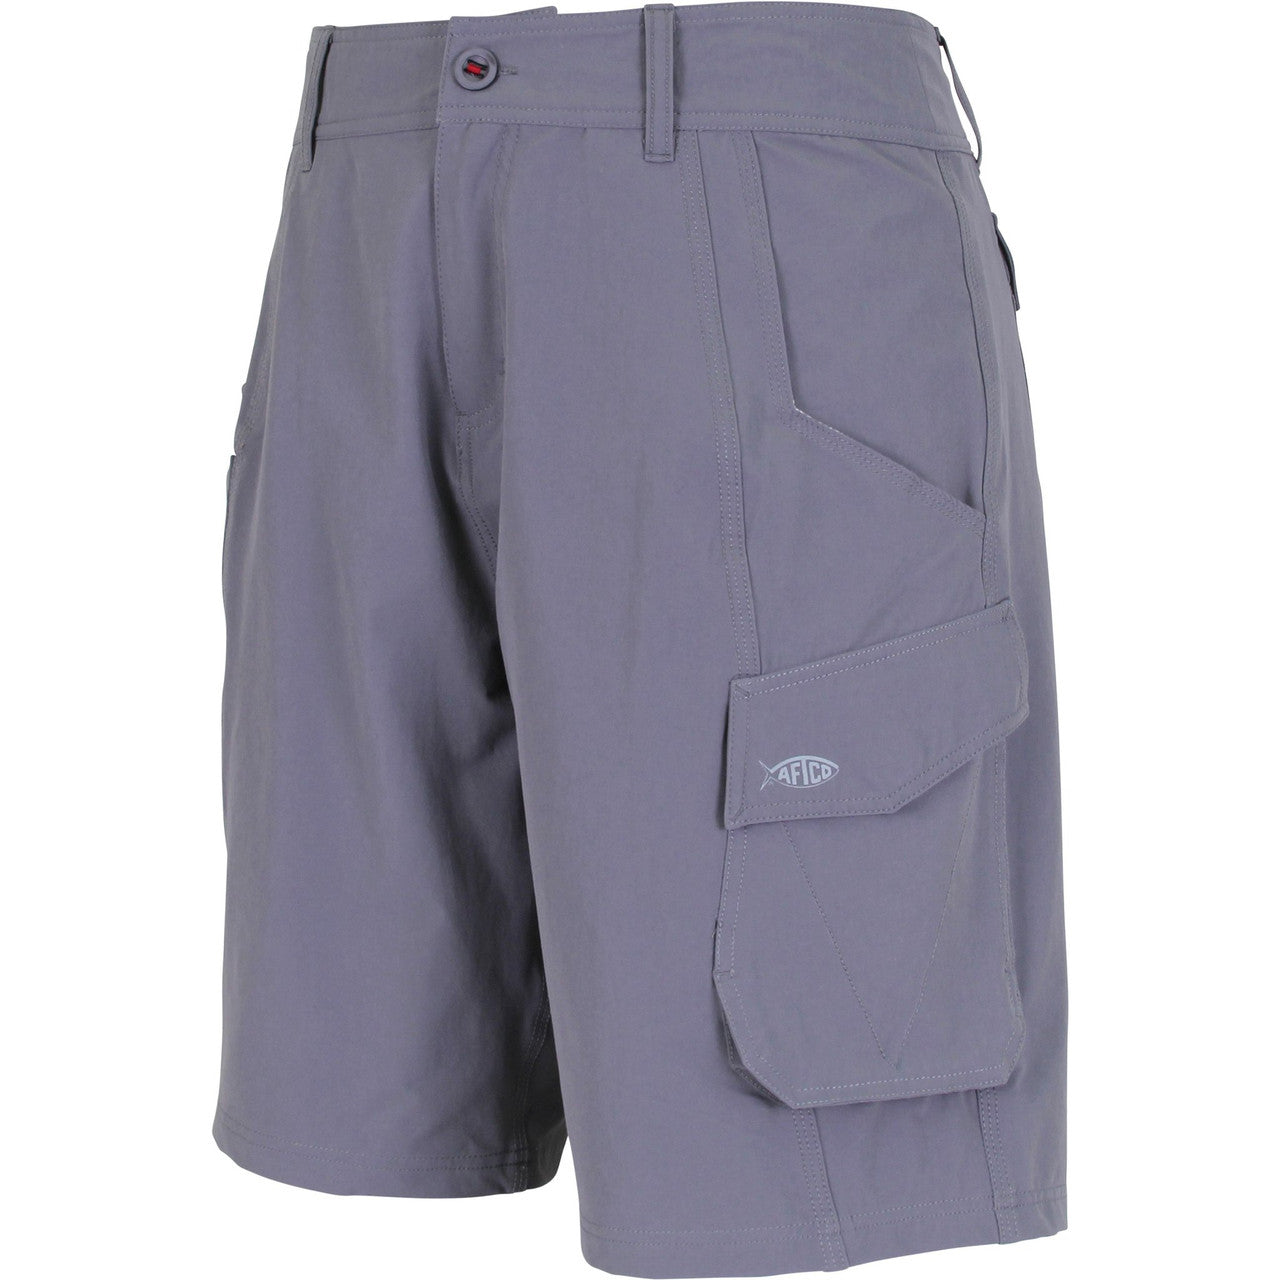 Aftco Stealth Shorts